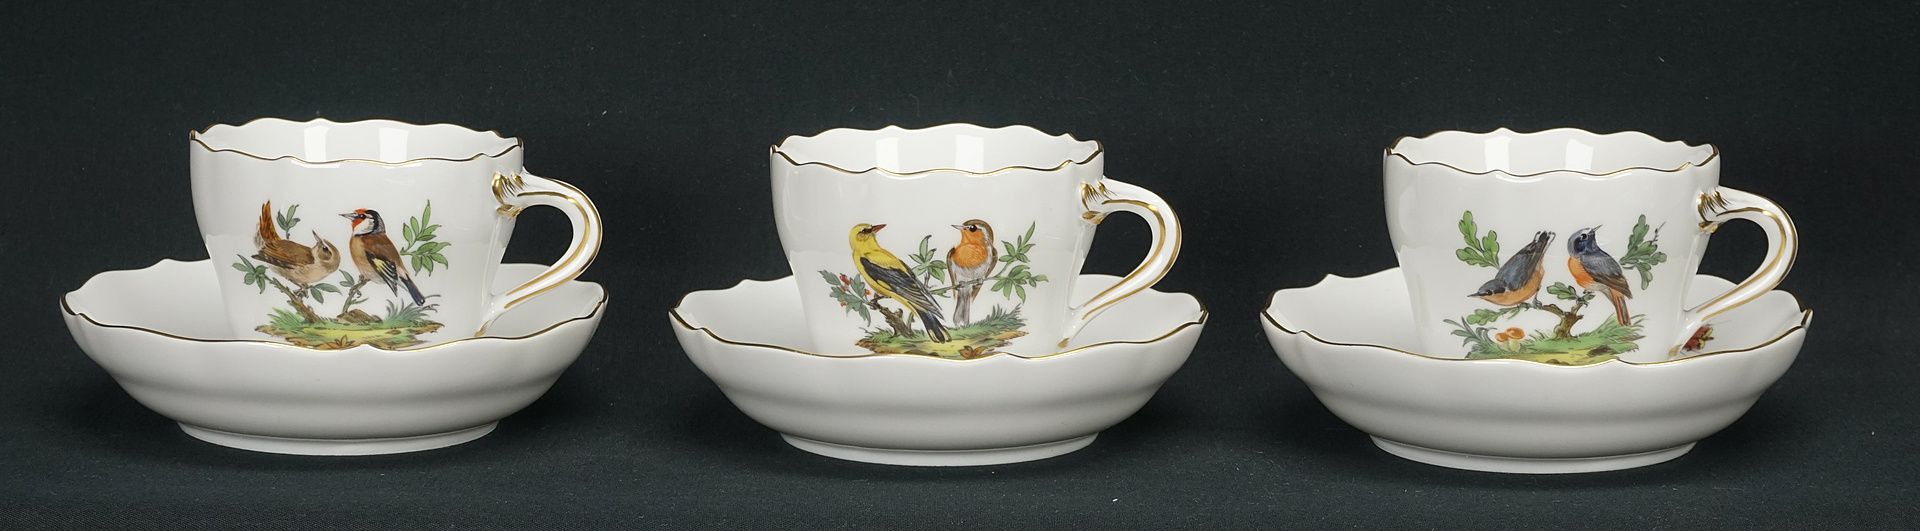 Meissen mocha service for six people with bird painting   - Image 6 of 6